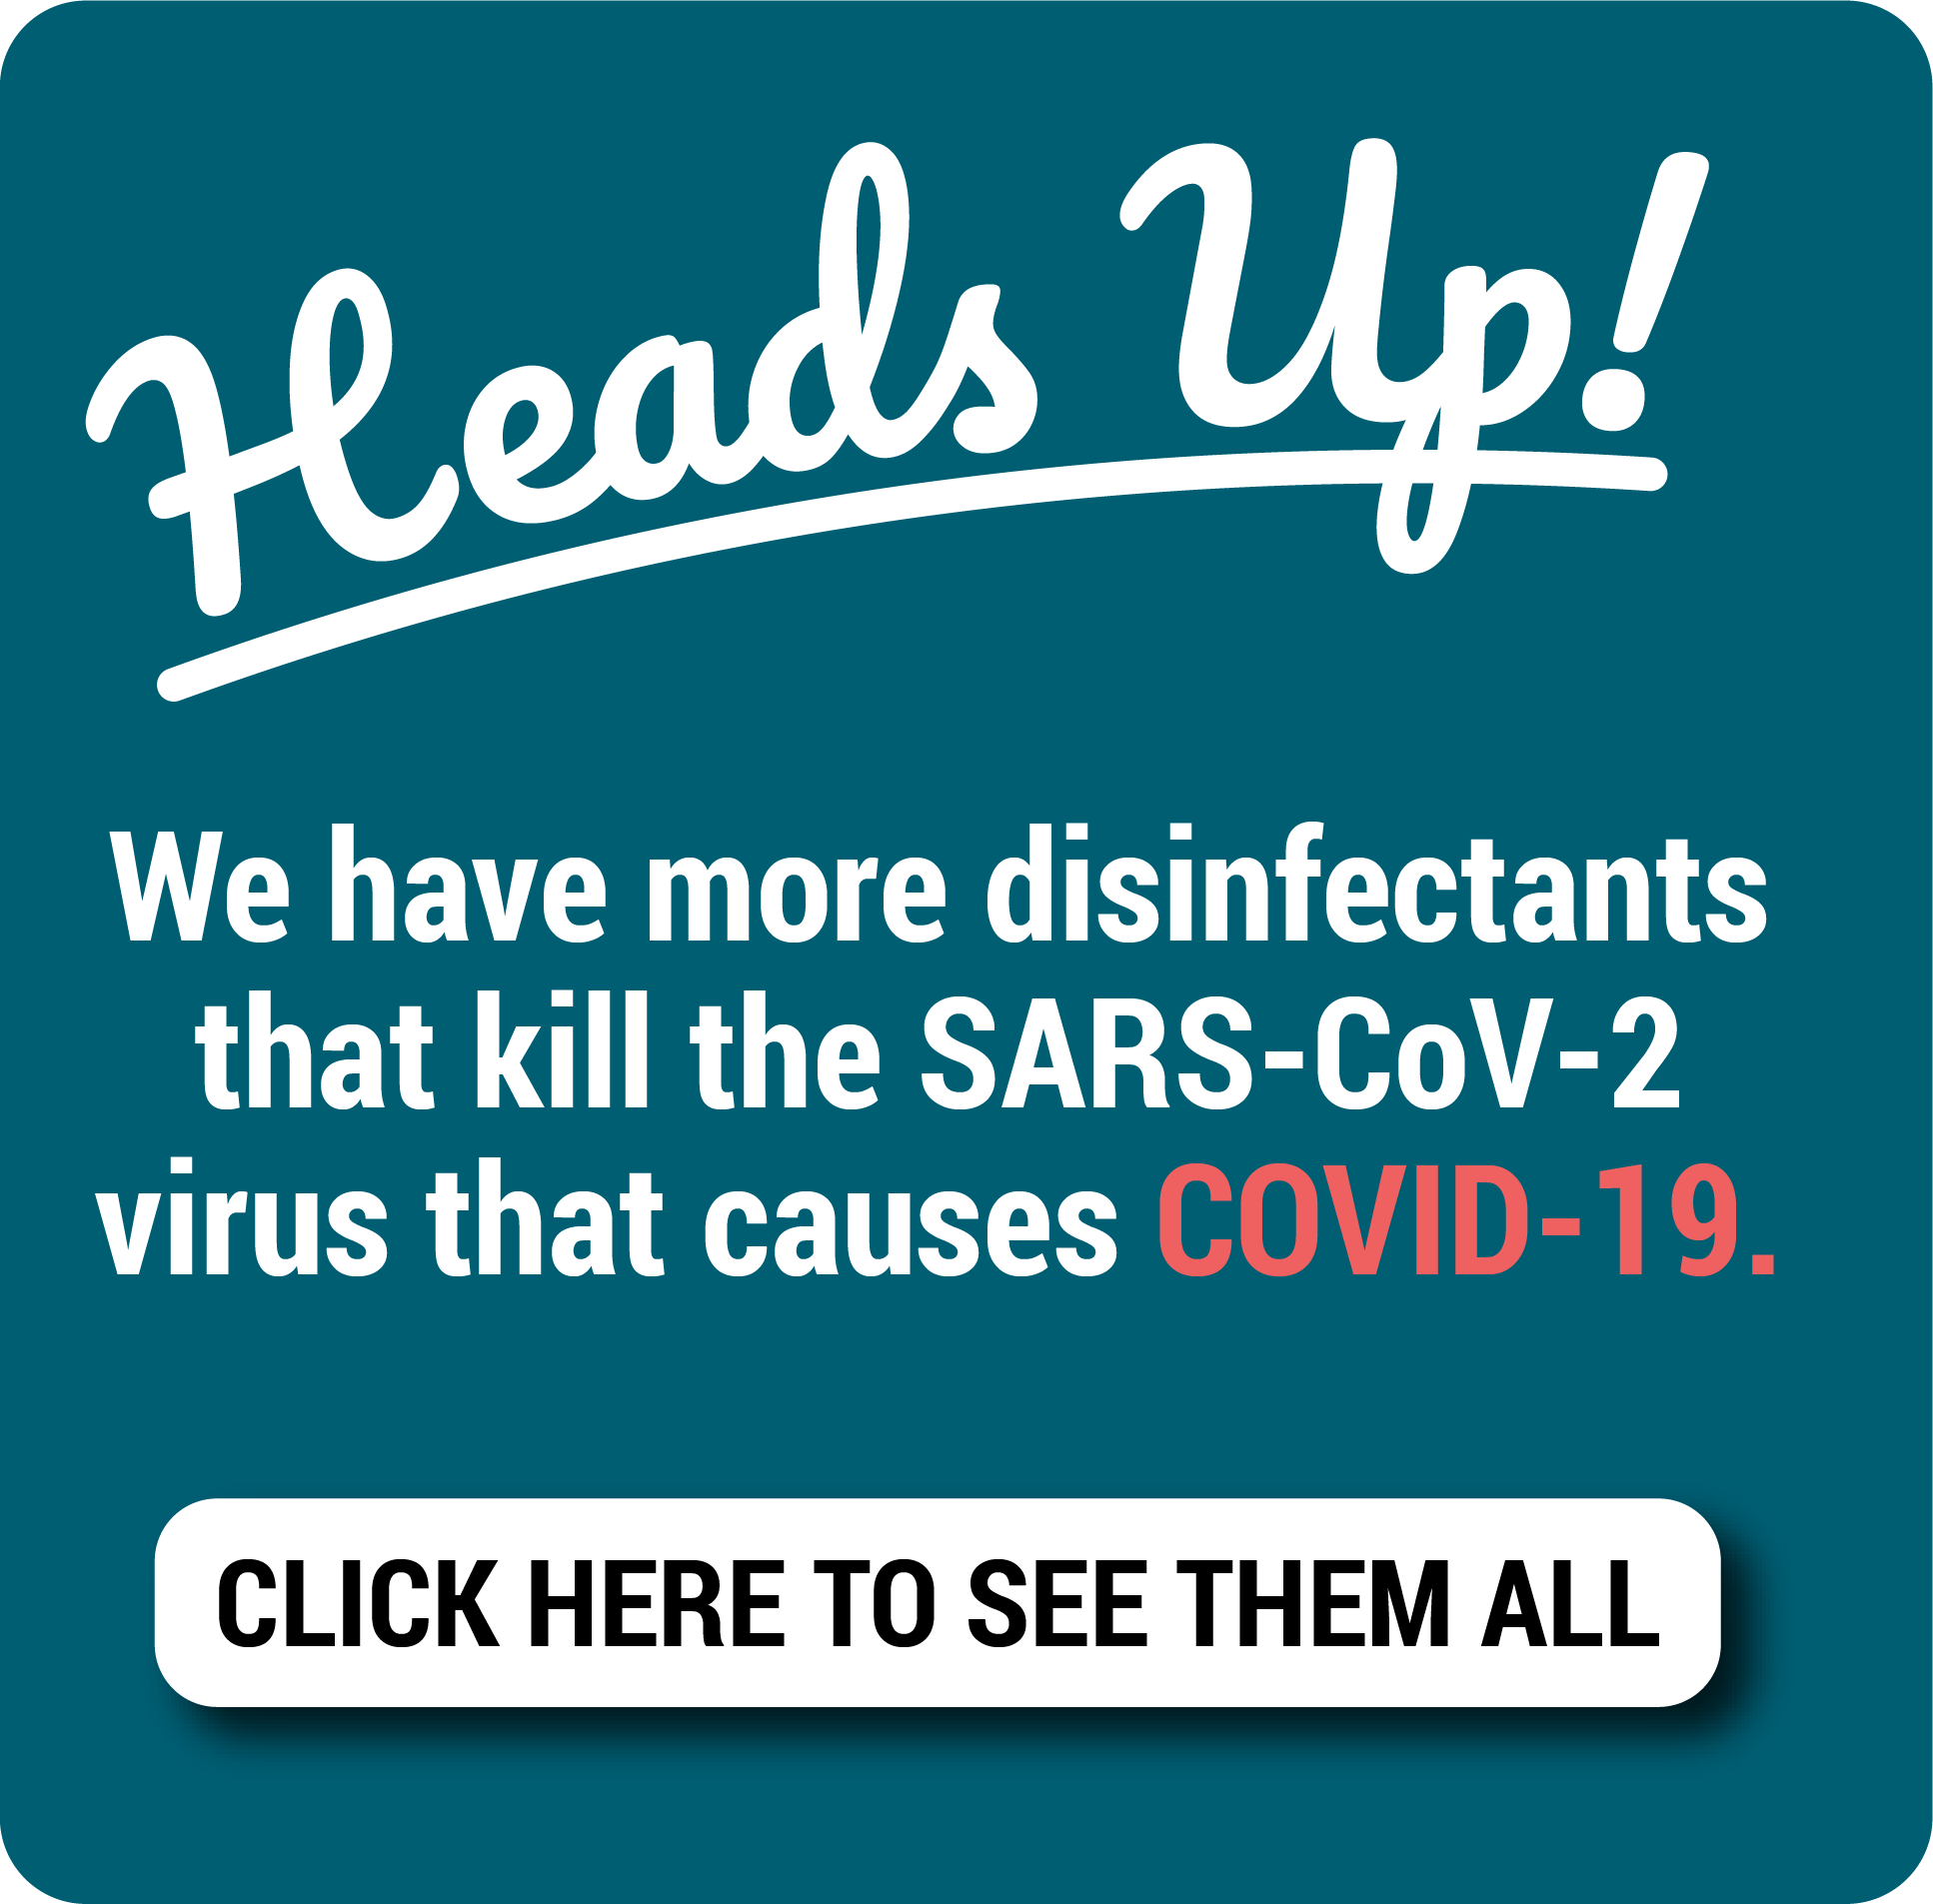 COVID-19 Disinfectants